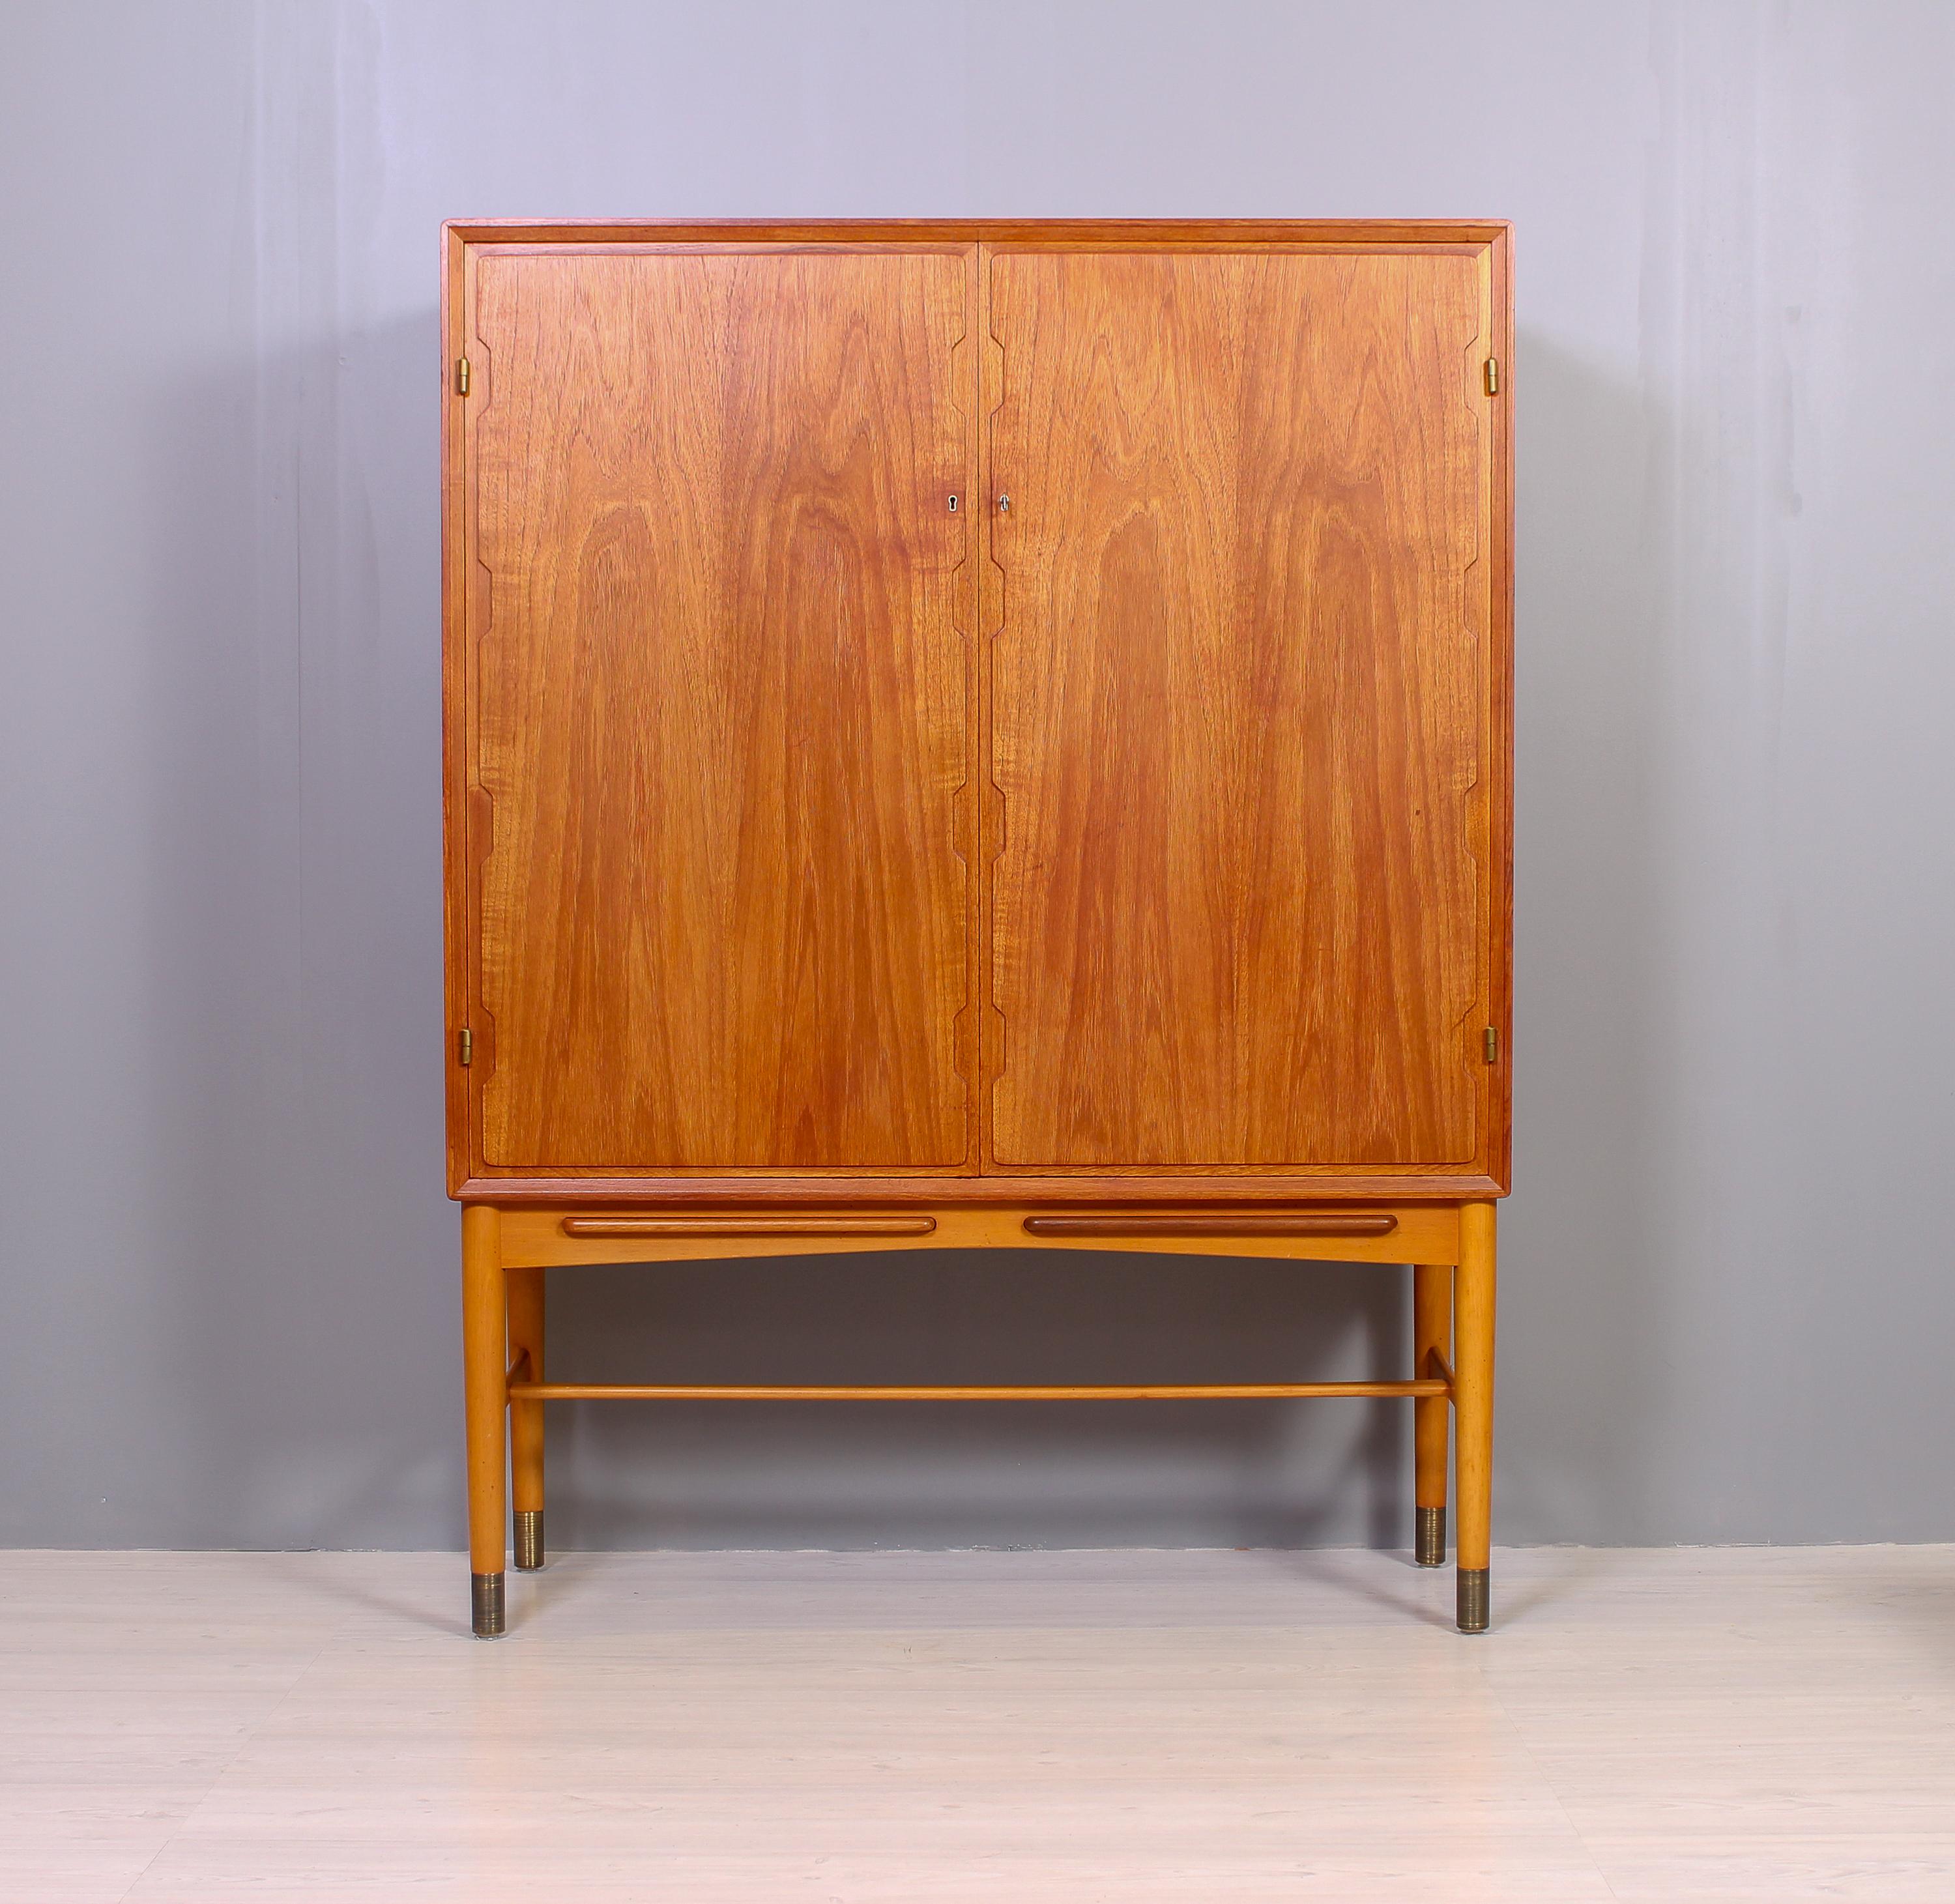 A excellent piece of Swedish midcentury Furniture from the 1950s. This cabinet is made out of teak with a beech base with brass endings. There are also pullout shelves and a well made interior. The cabinet is in very good vintage condition with